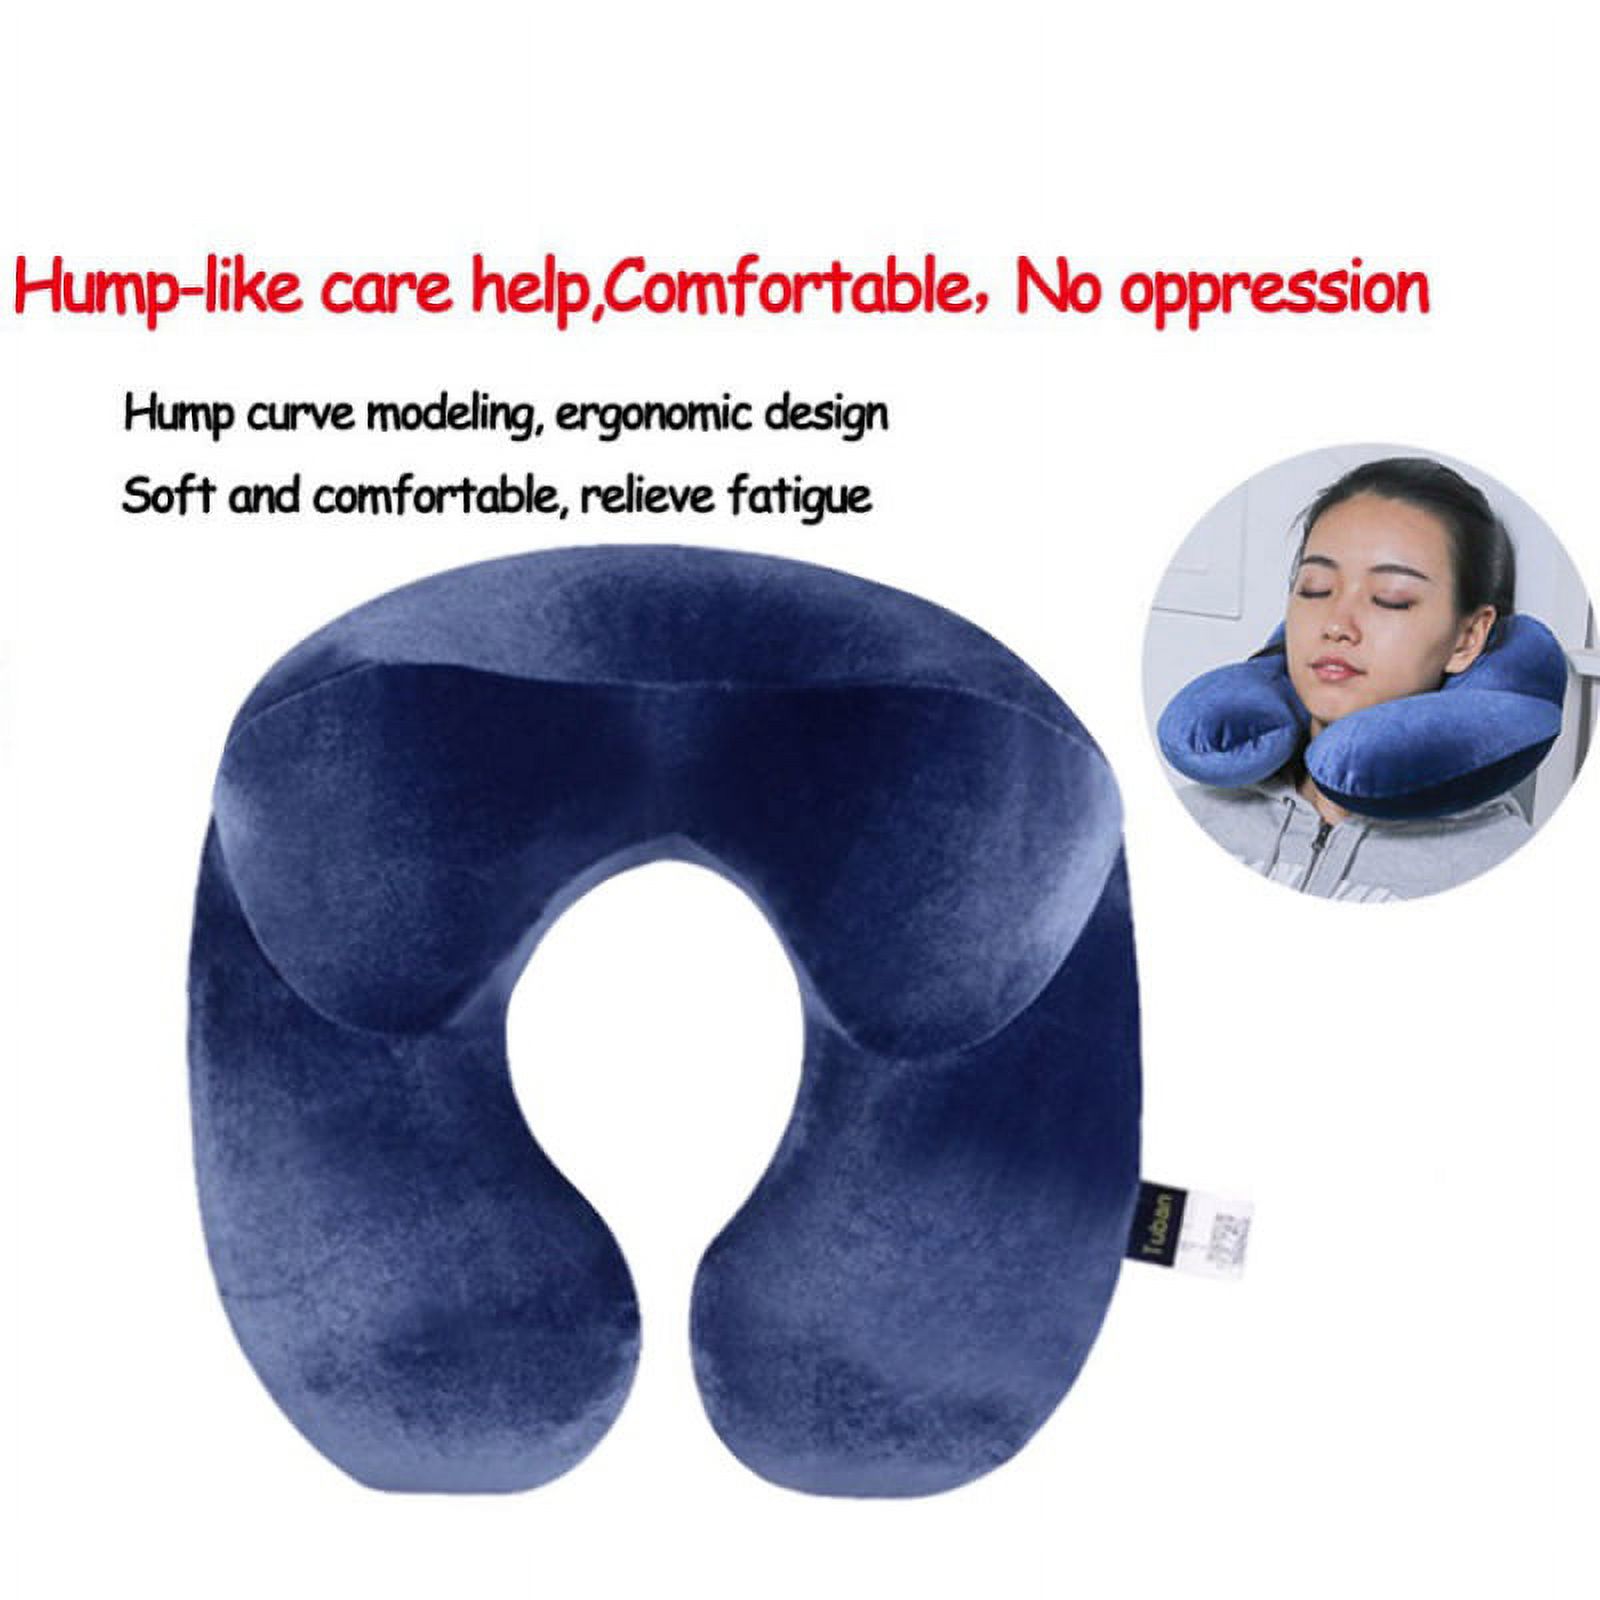 Inflatable Soft Velvet Travel Neck Pillow Set, U Shape, Neck Support for Cars, Airplanes Camping - image 5 of 5